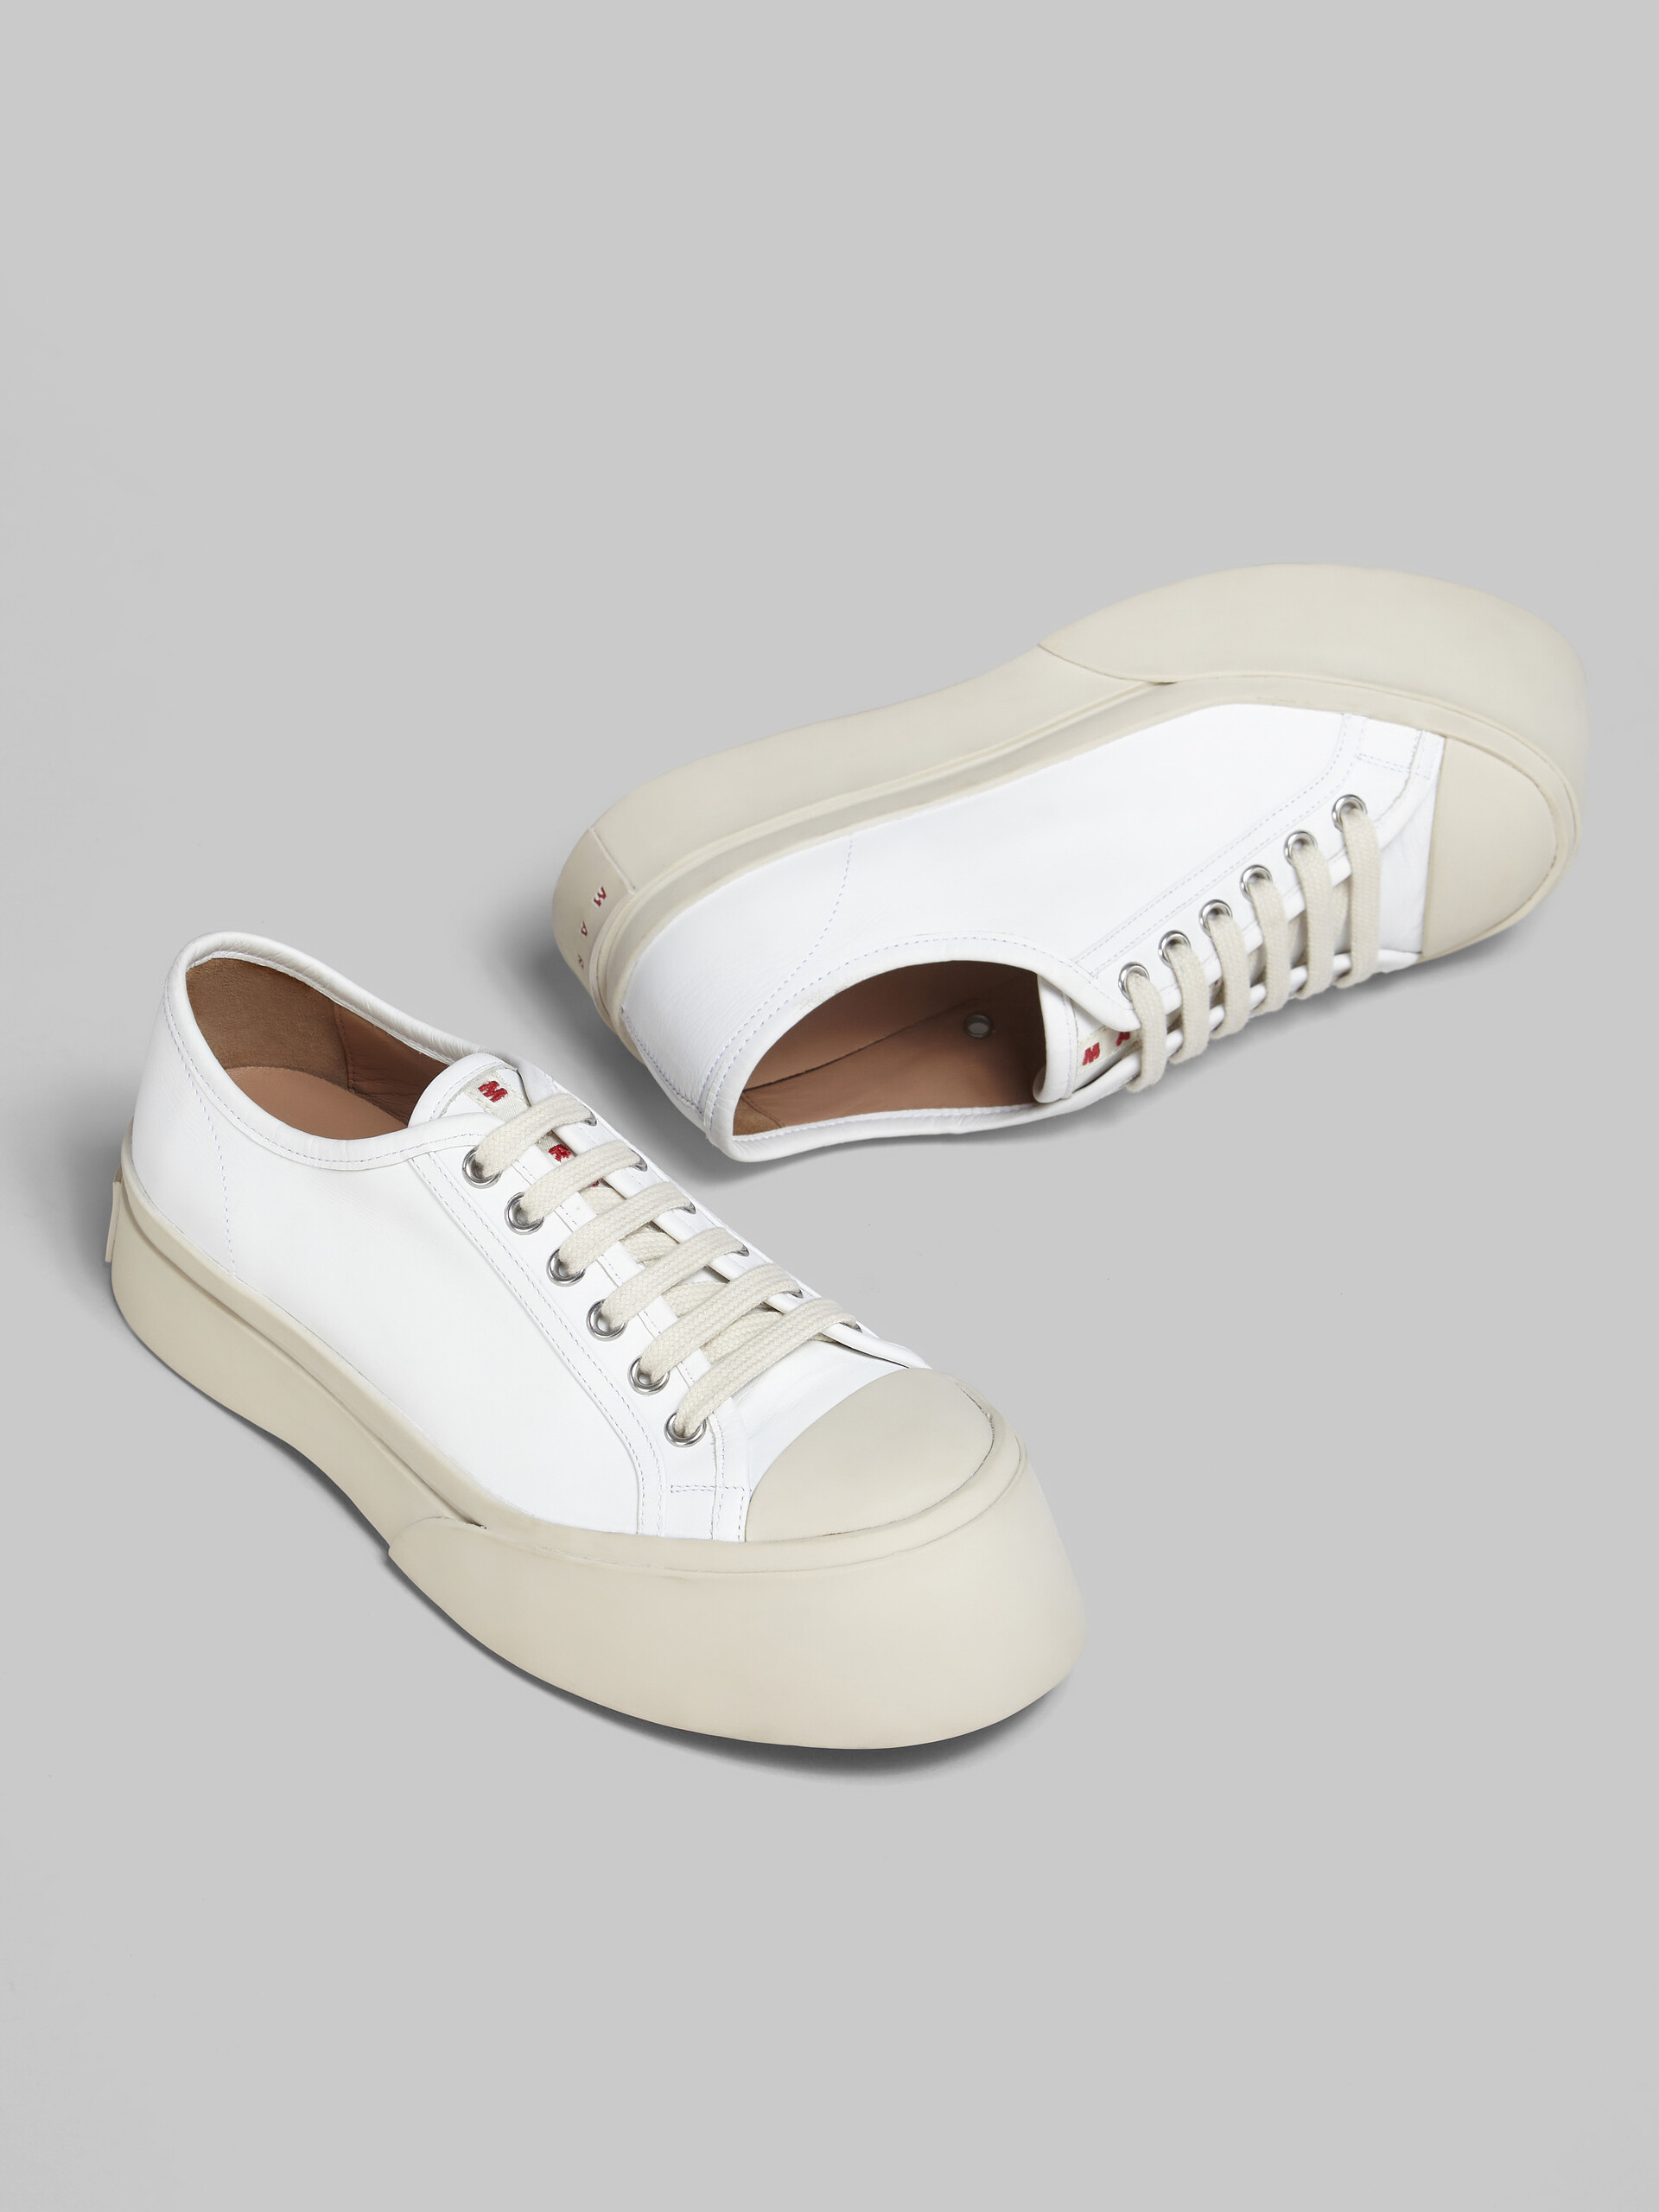 White nappa leather PABLO lace-up sneaker - Sneakers - Image 5